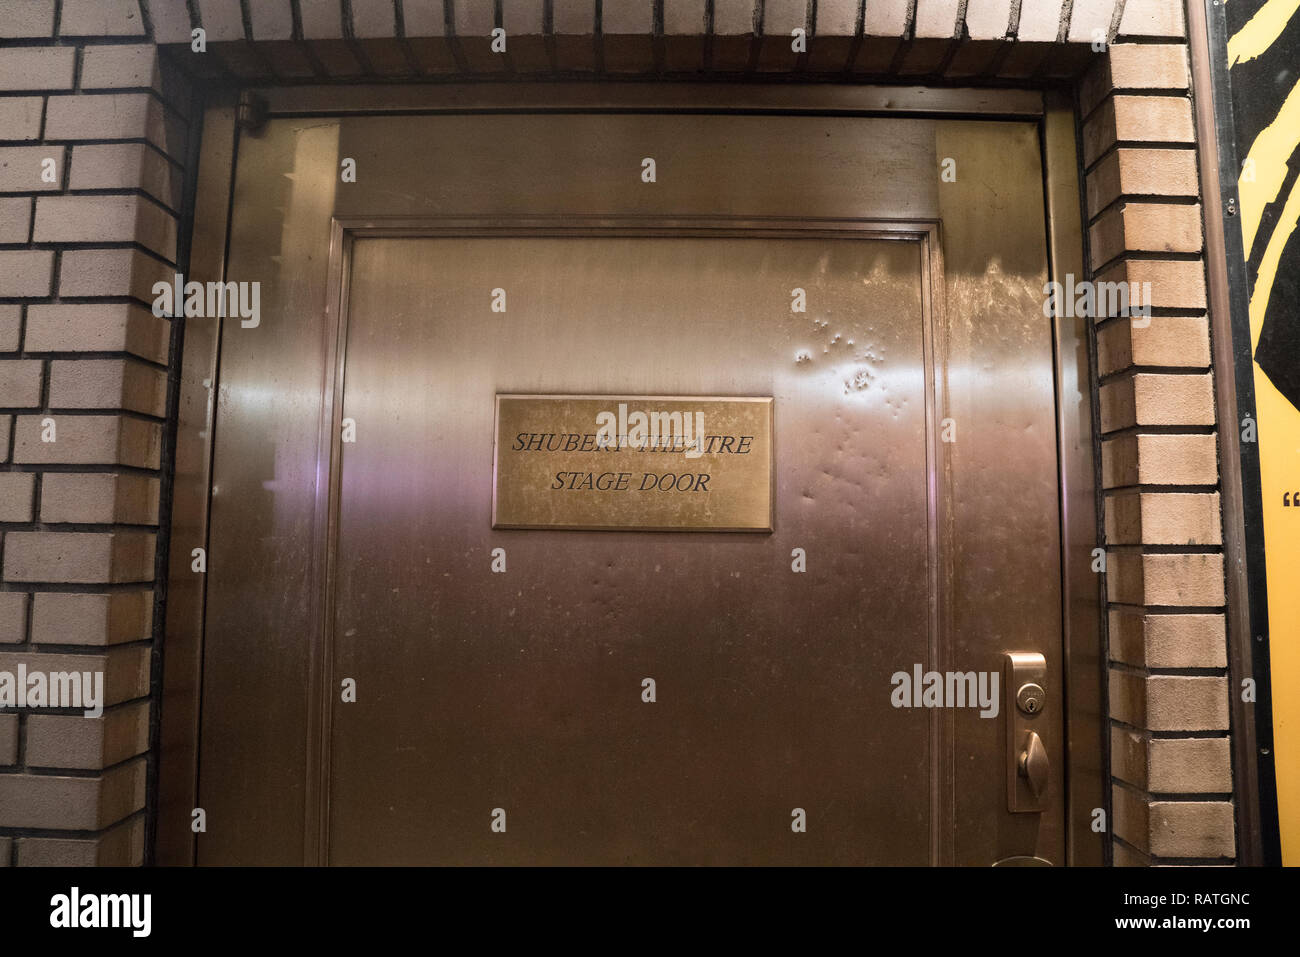 The stage door of the Schubert Theatre at 225 West 44th Street in midtown Manhattan. The theatre opened in 1913 and is a New York City landmark. Stock Photo